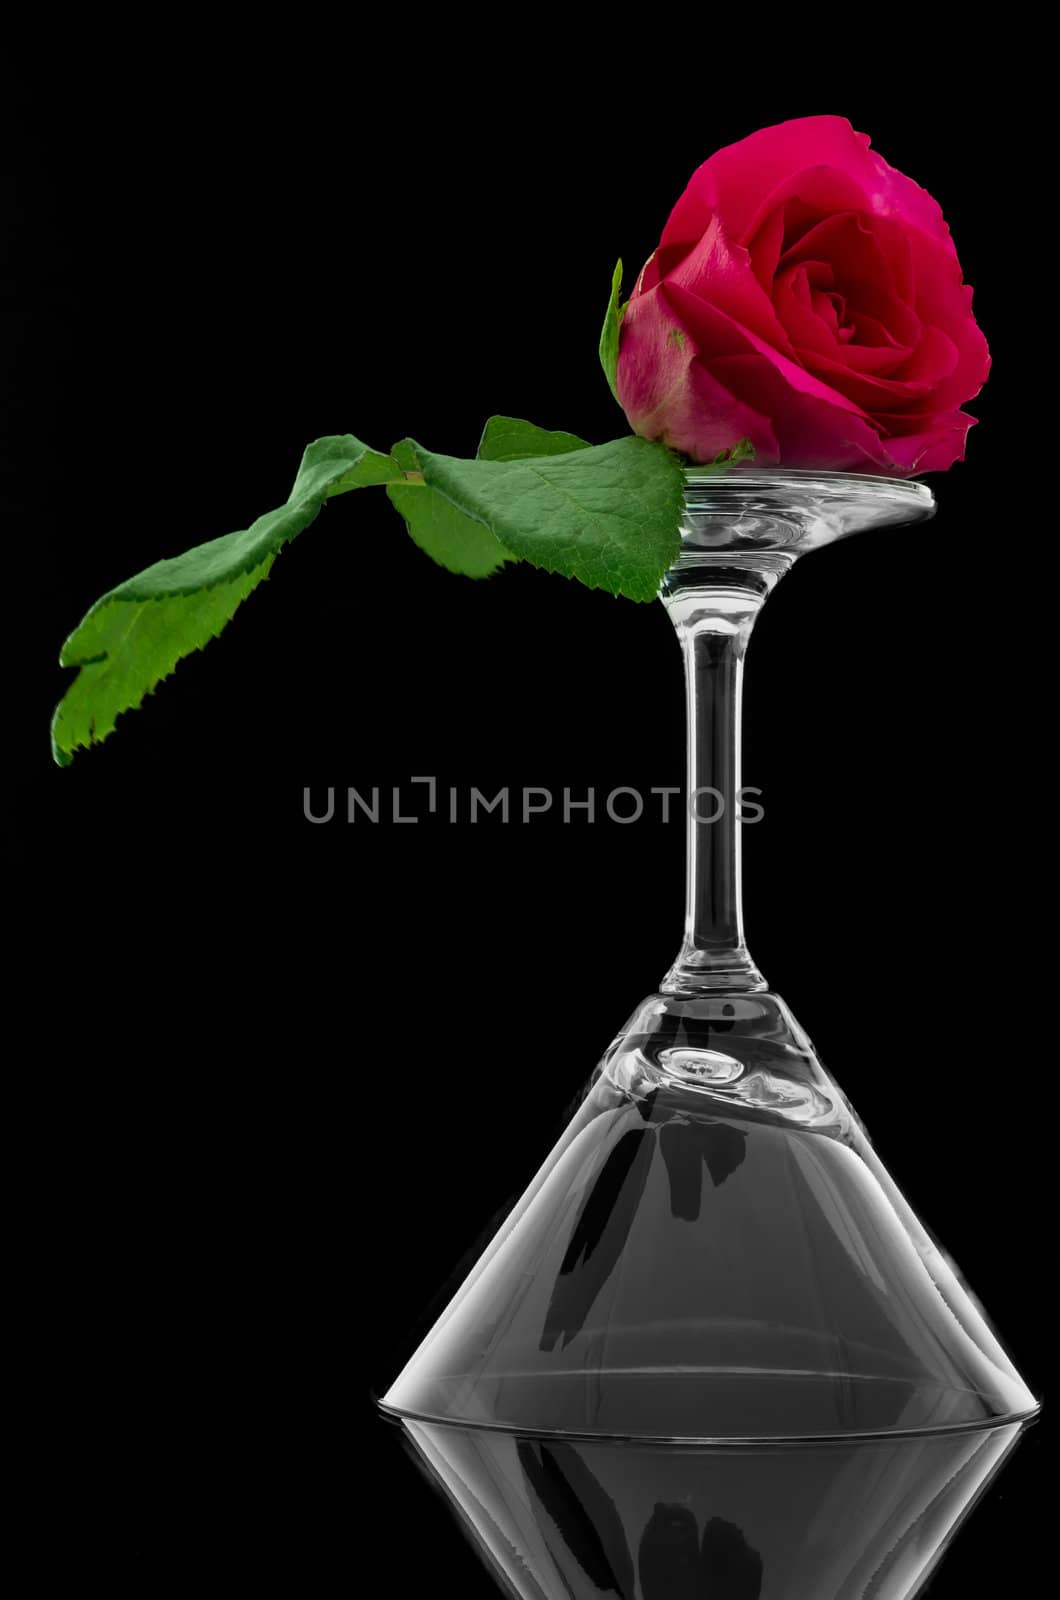 Rose on overturn empty cocktail glass by nuttakit